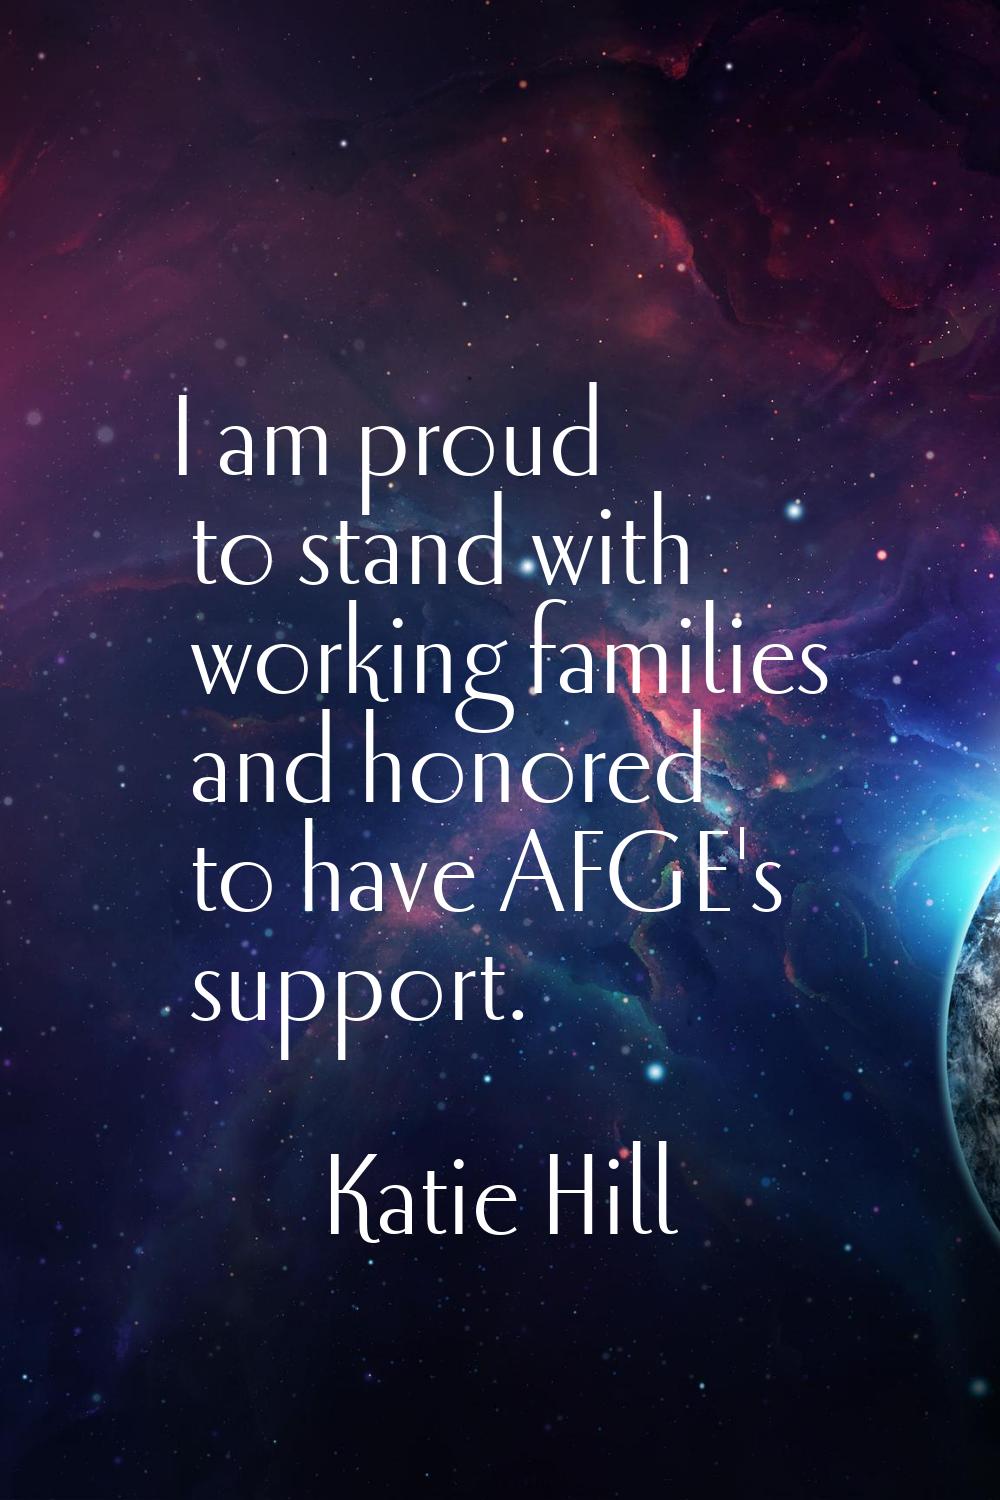 I am proud to stand with working families and honored to have AFGE's support.